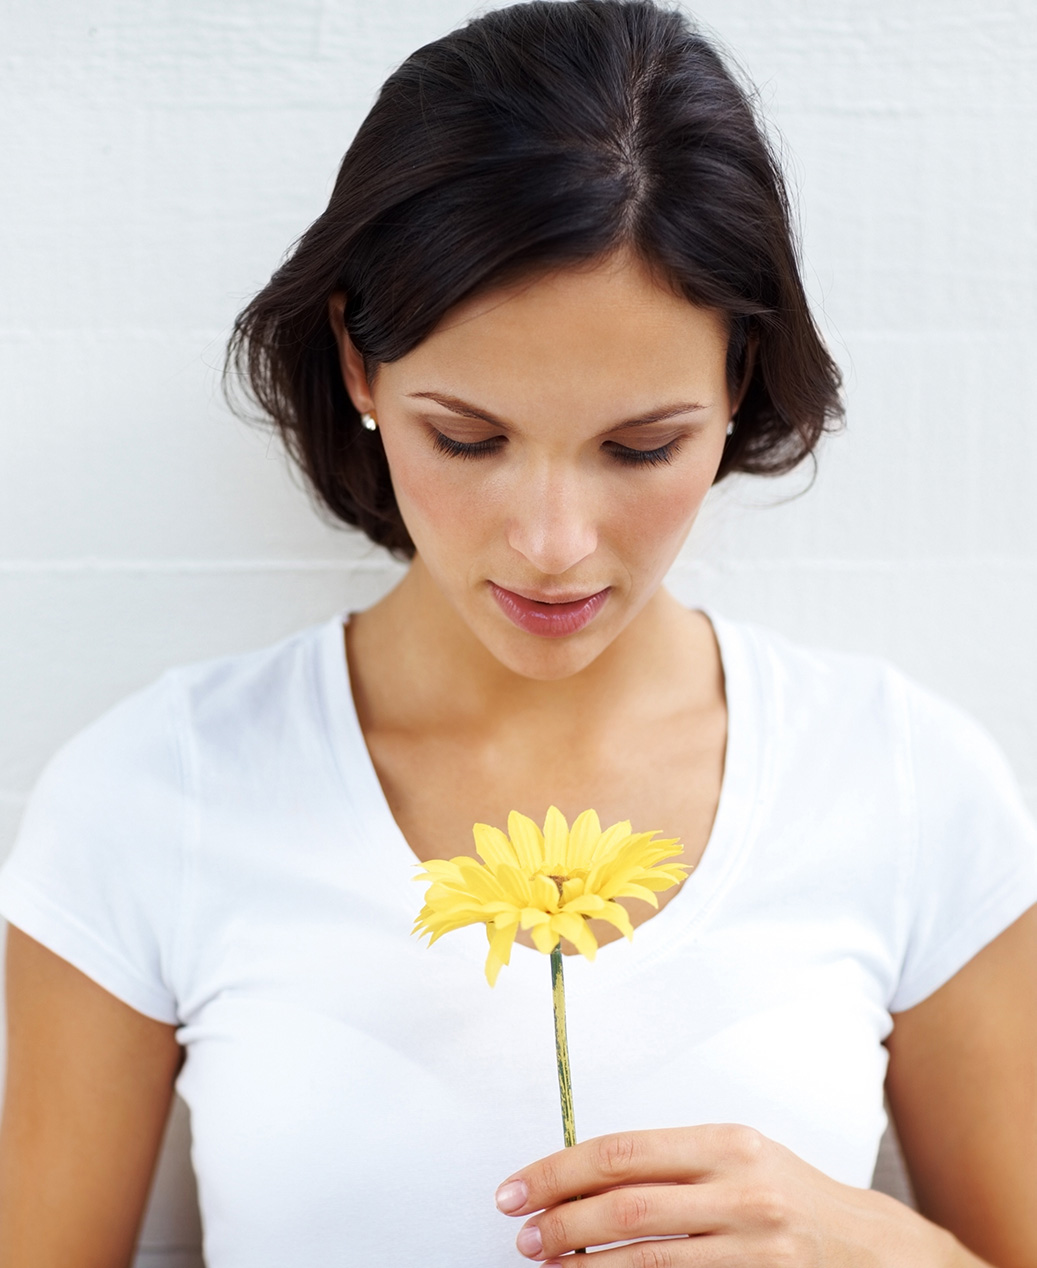 Lady holding yellow flower to represent Fashion Cleaners GreenEarth Eco-Friendly Dry Cleaning